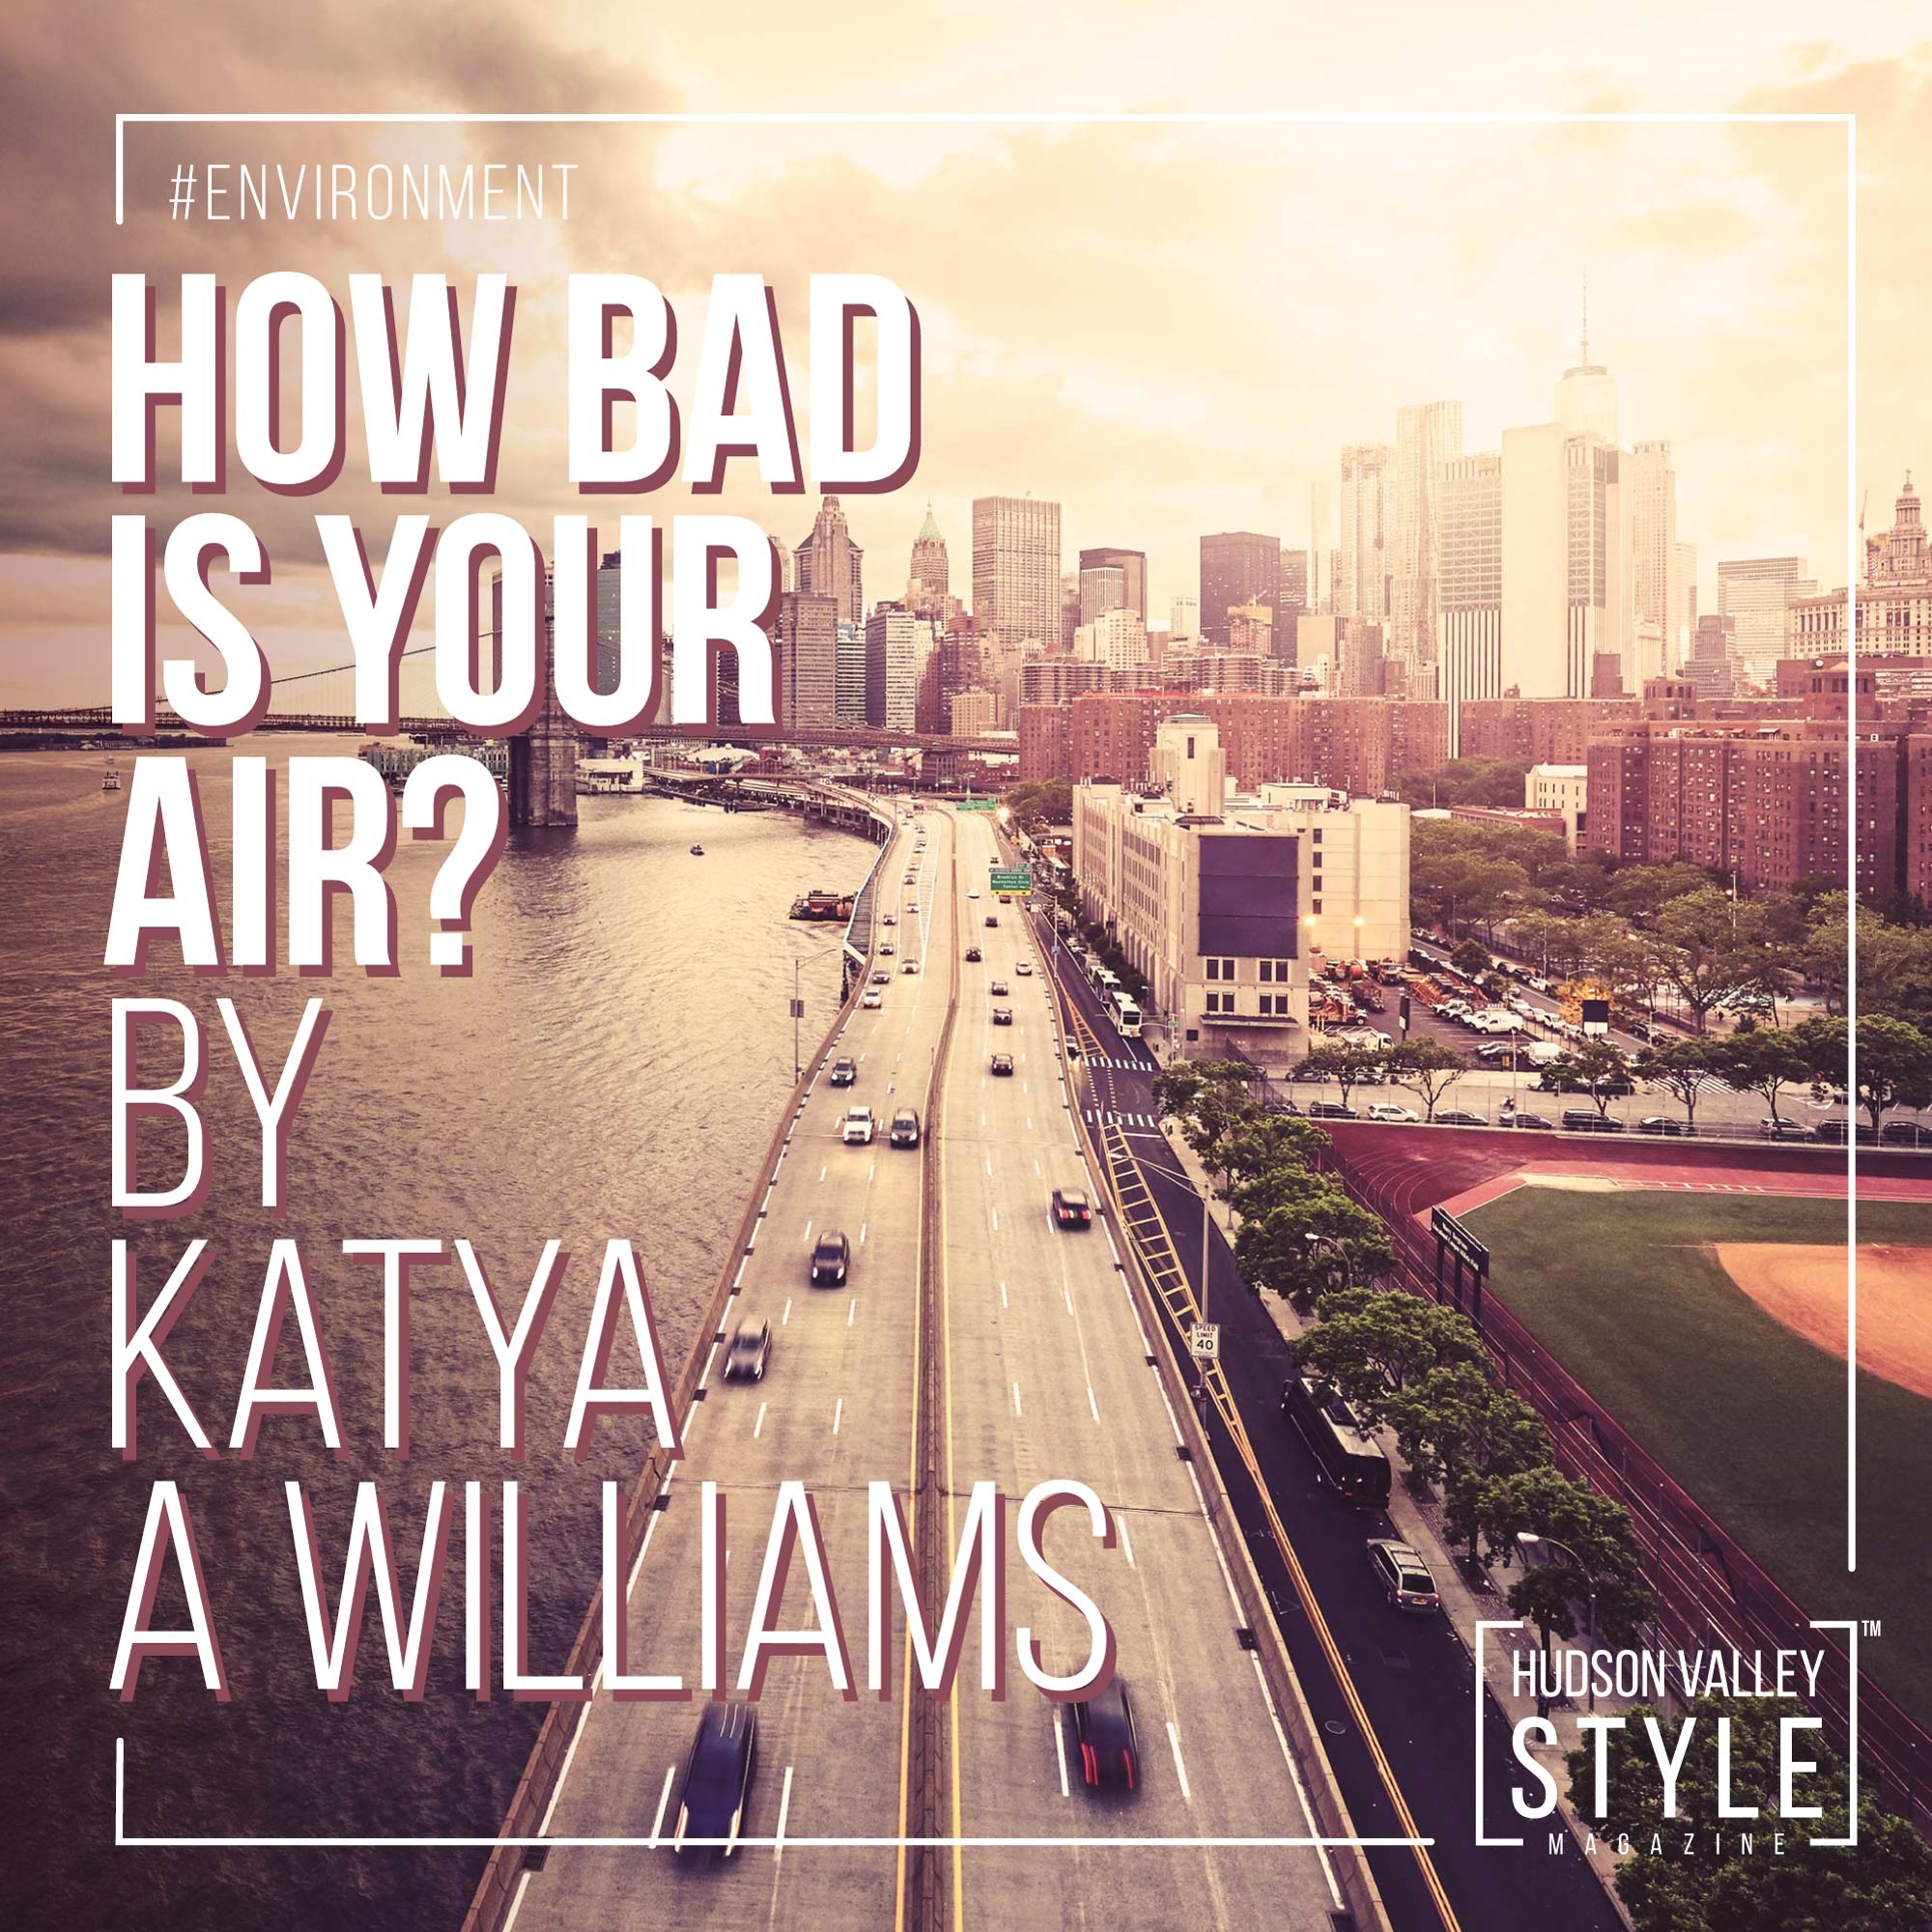 How bad is your air? by Katya A Williams, Hudson Valley Style Magazine Editor, Sustainability and Social Responsibility